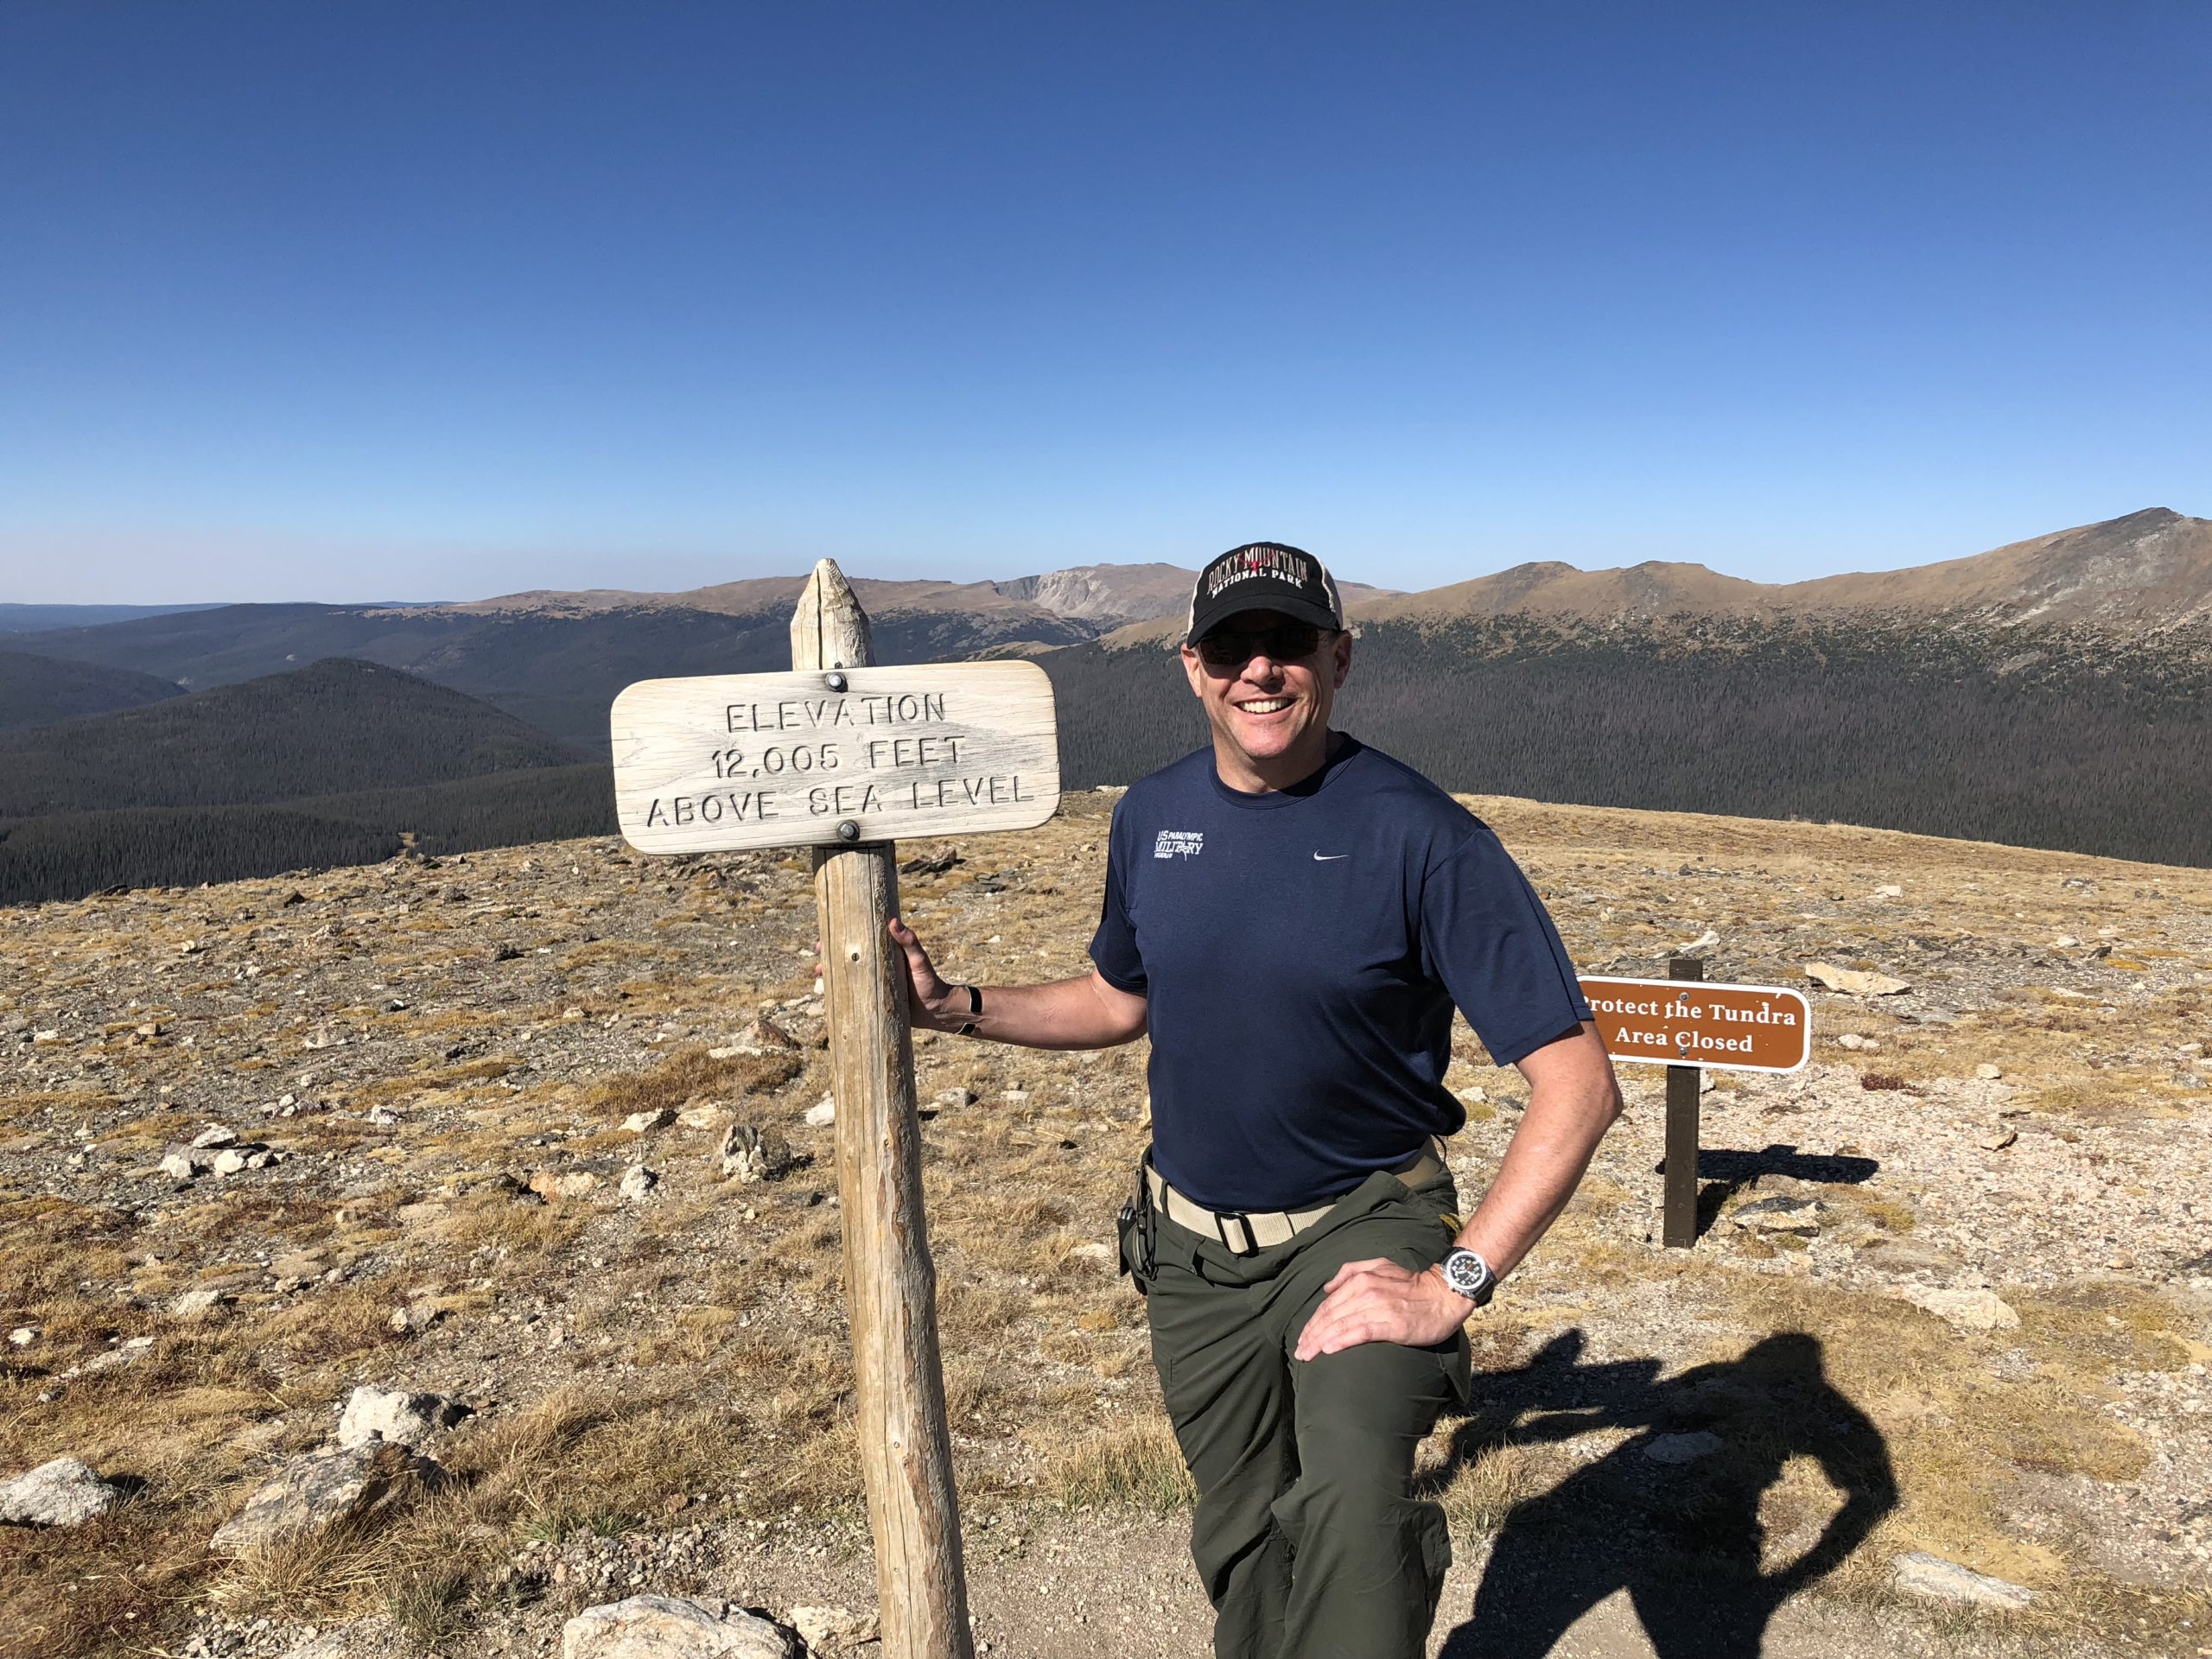 Male posed smiling at the camera by a sign that says elevation 12,000 feet above sea level with mountains in the background